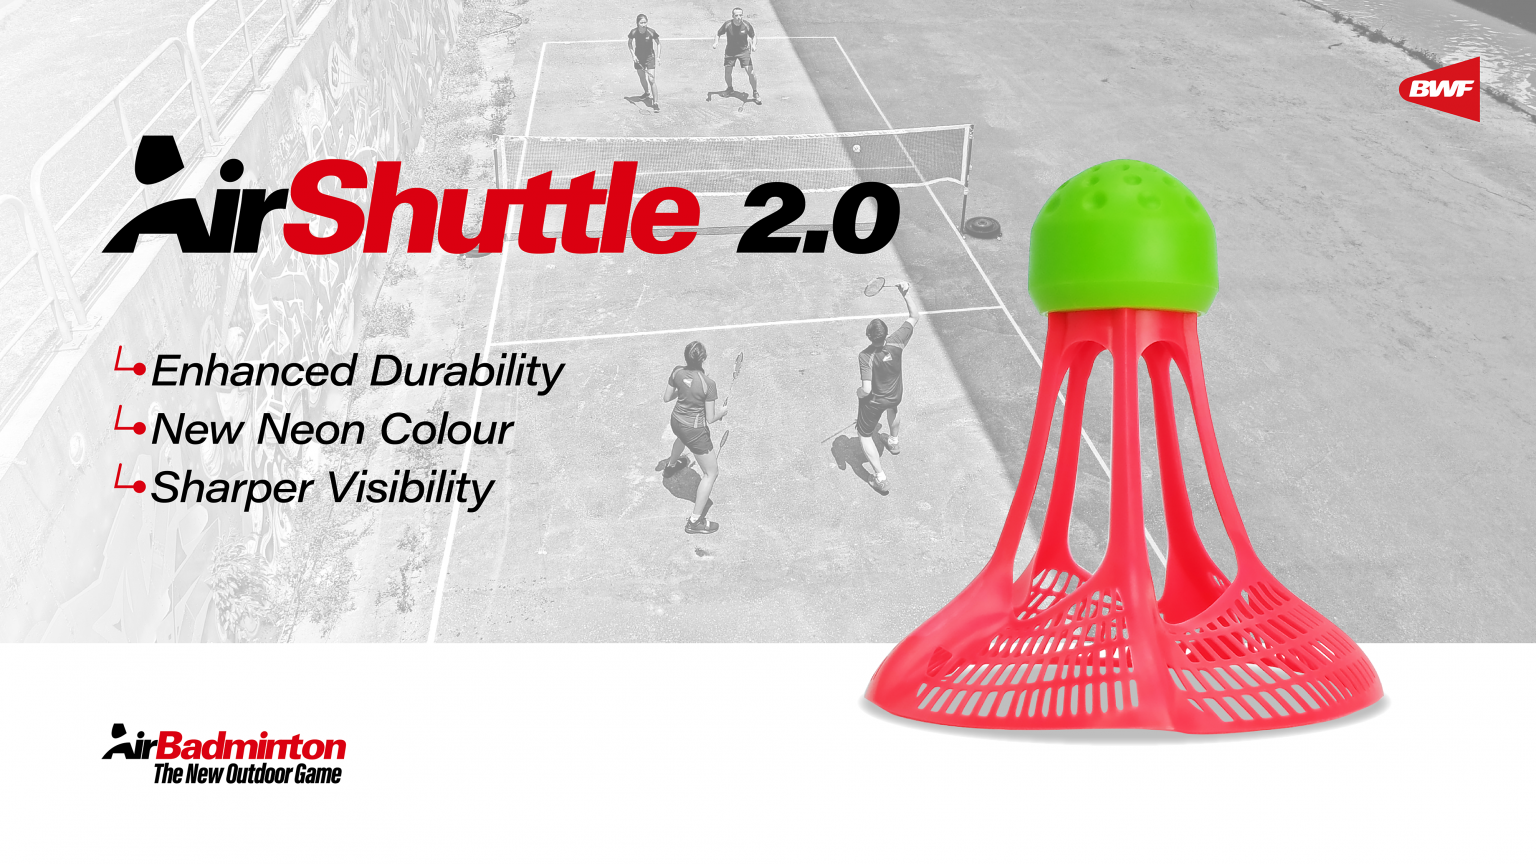 AirShuttles New Outdoor Badminton Shuttle BWF Approved 1Tube Airbadminton 3pcs 